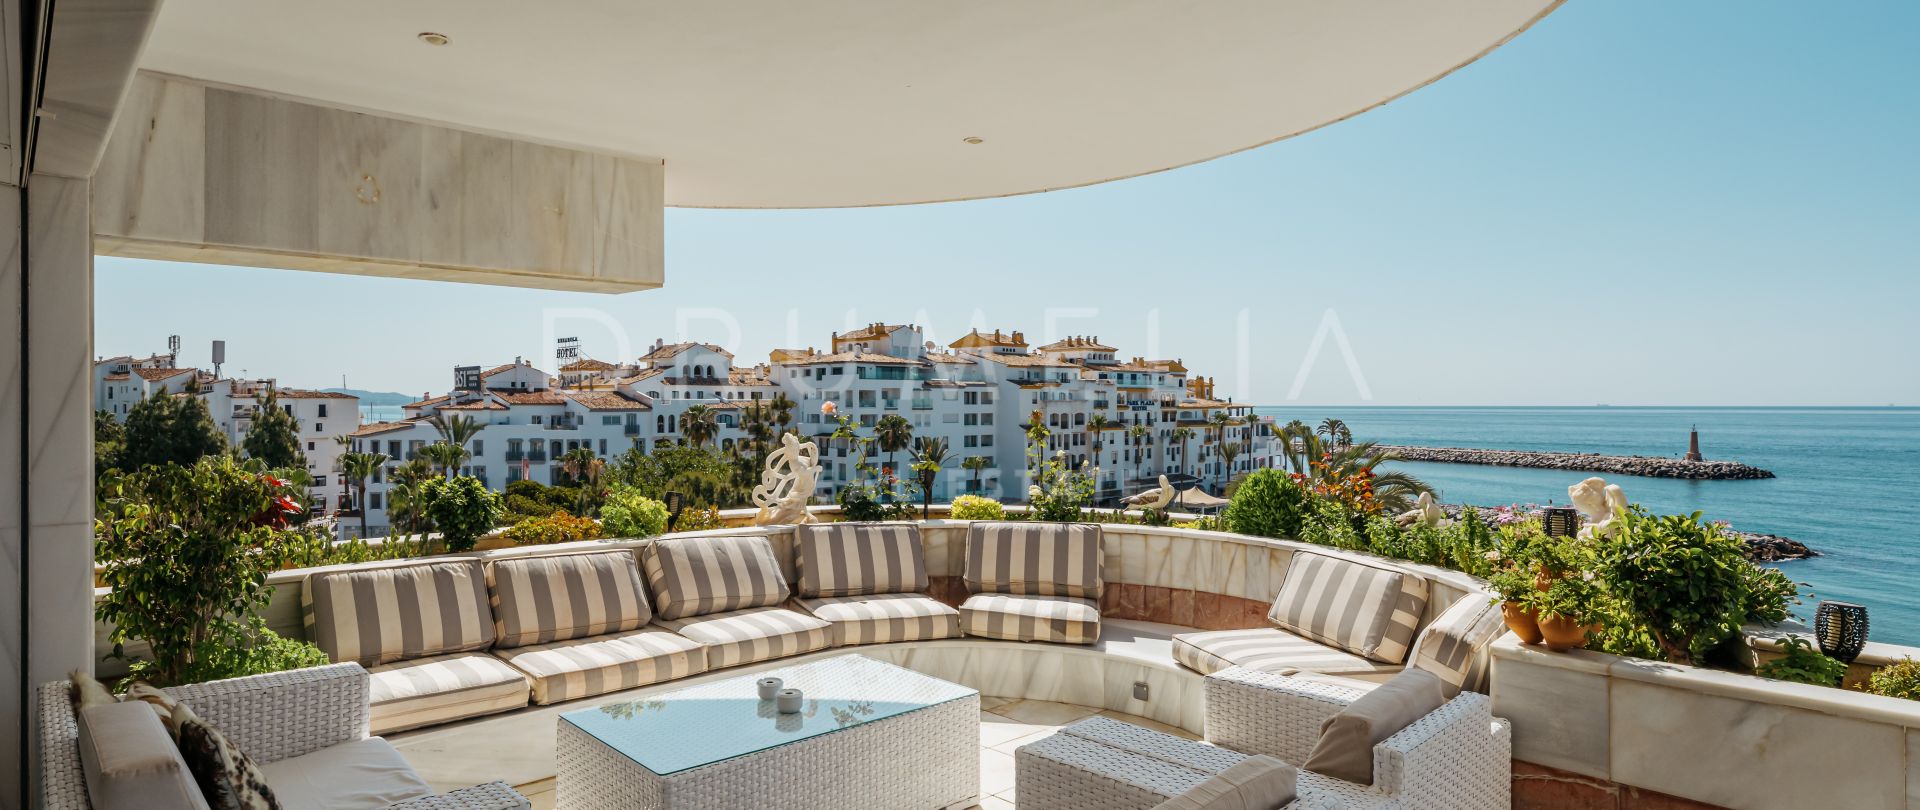 Unique frontline beach penthouse triplex with magnificent views and pool in Puerto Banus, Marbella